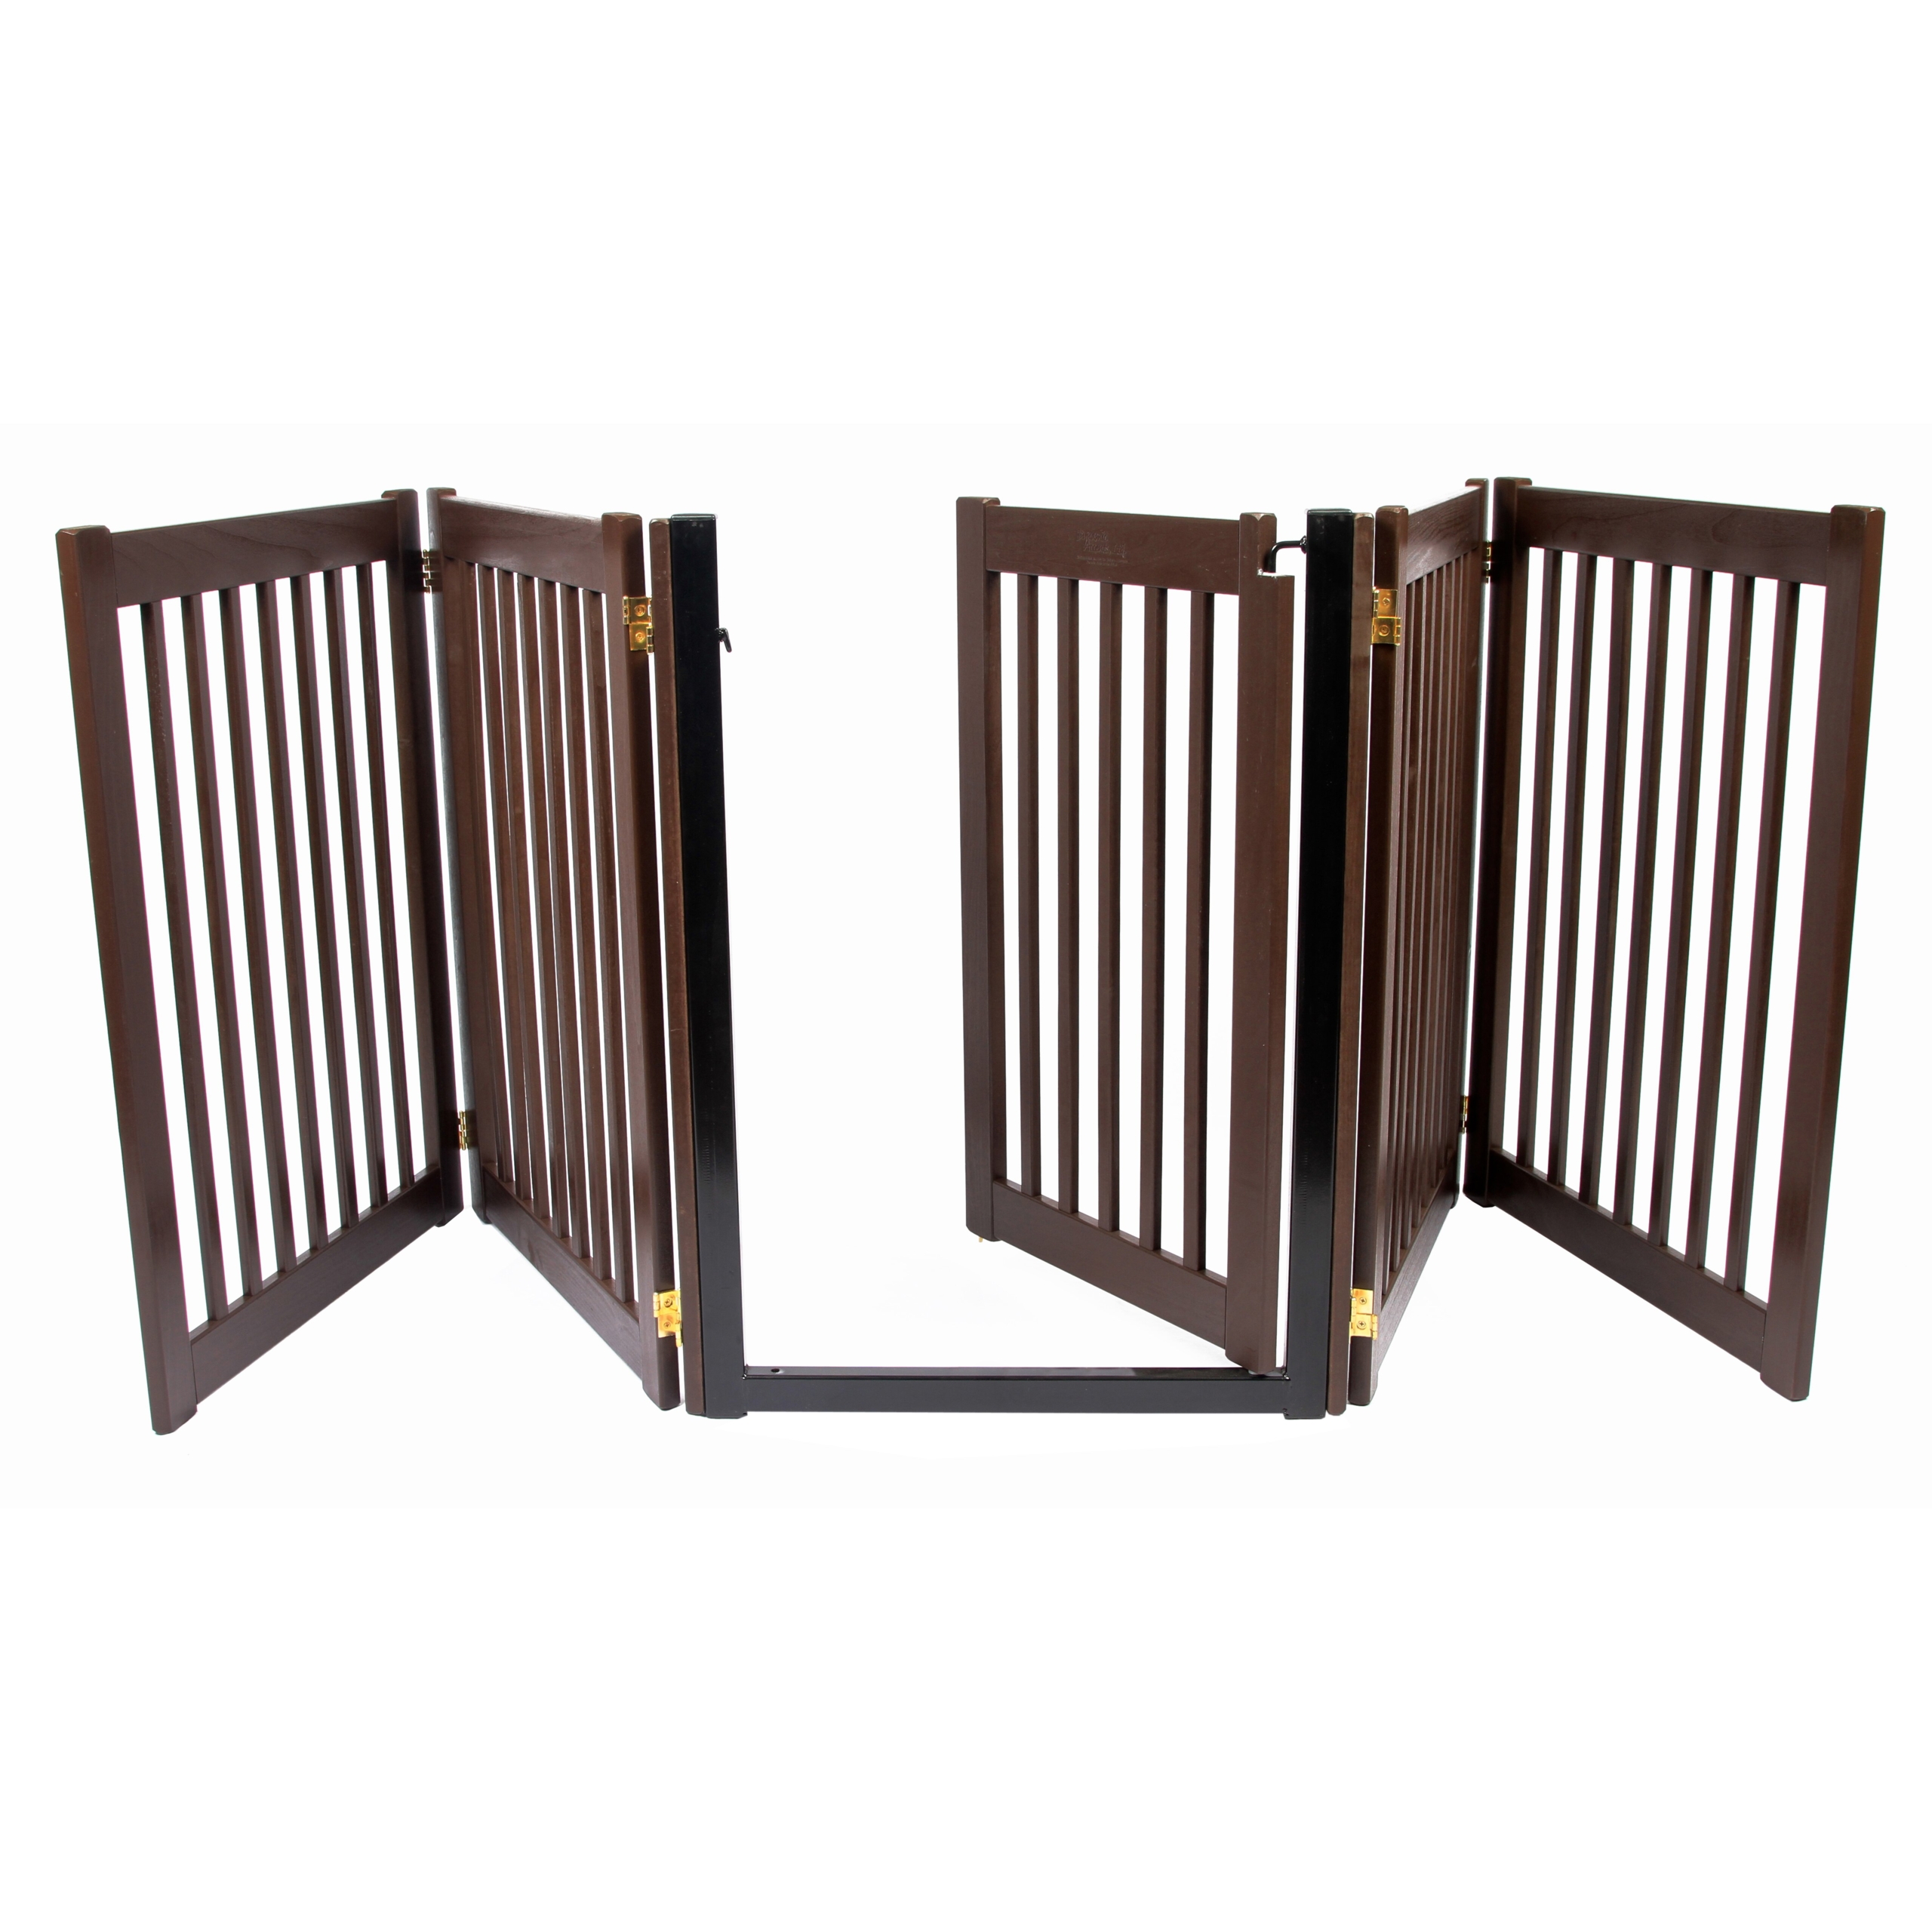 Pet Gate Black Magic Gate for Dog QUV Mesh Dog Gate Safety Fence for House Stair Doorway Door Fits 32 in to 43 in Wide 